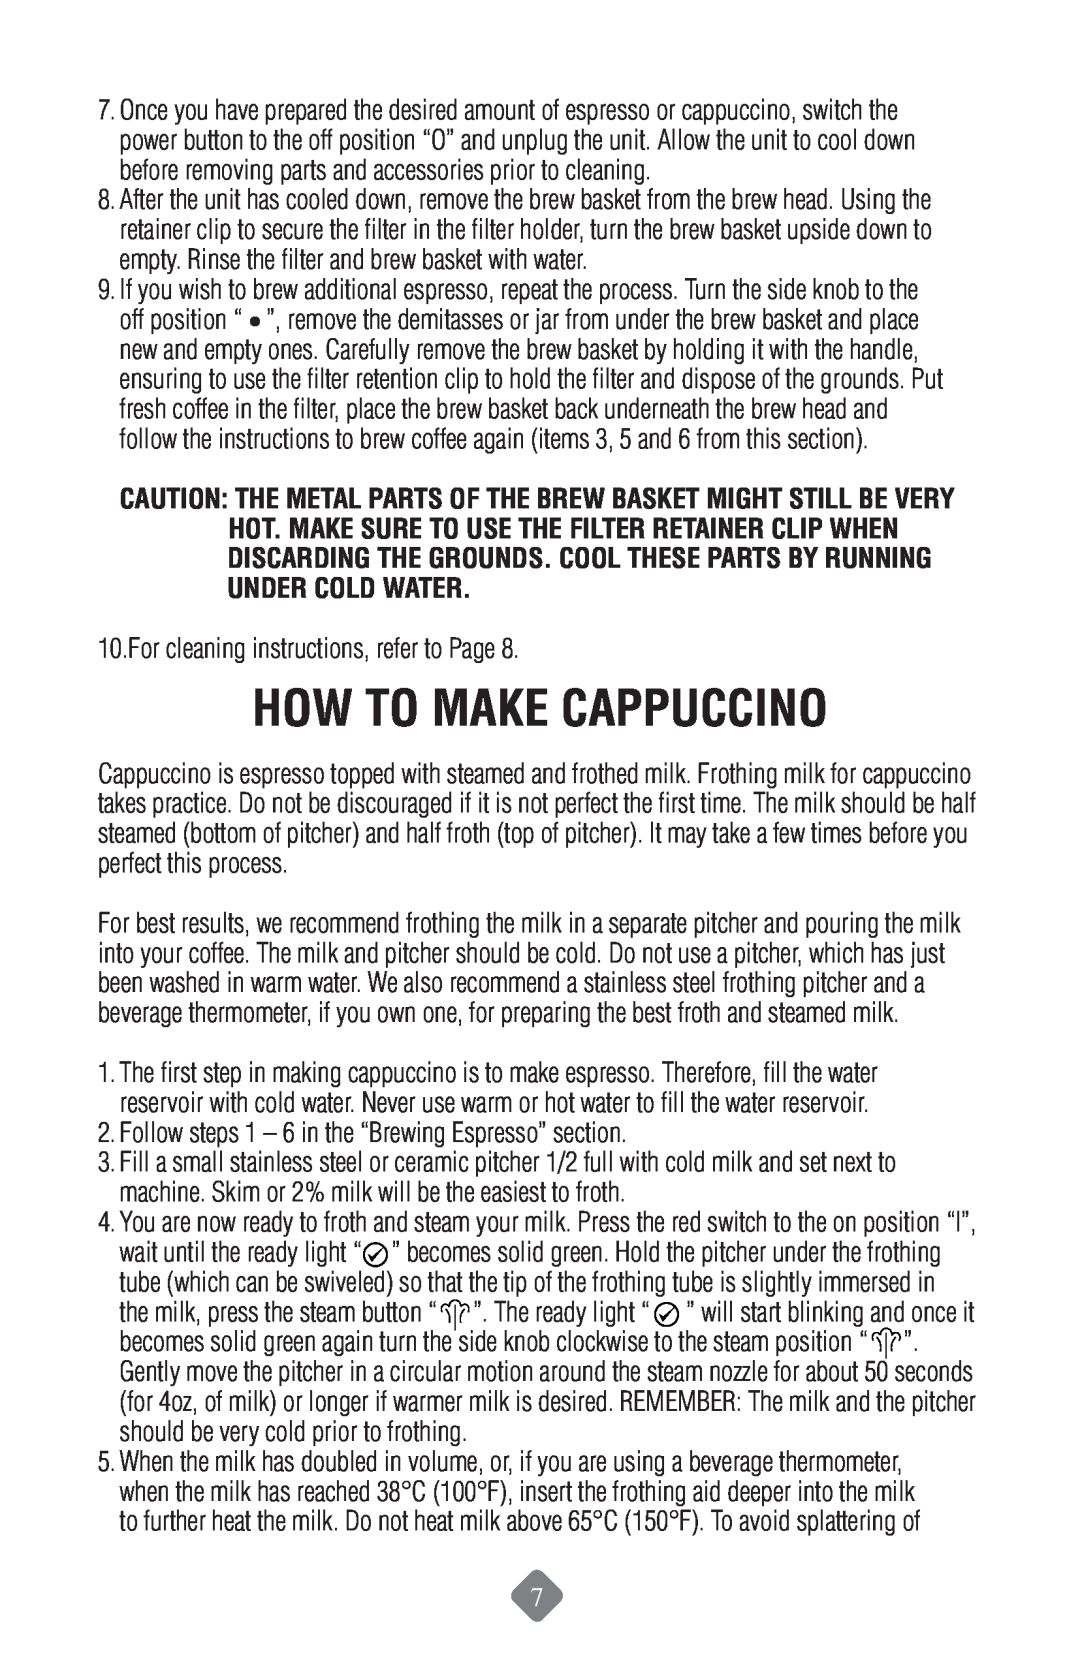 Mr. Coffee ECMP50 instruction manual How To Make Cappuccino, For cleaning instructions, refer to Page 